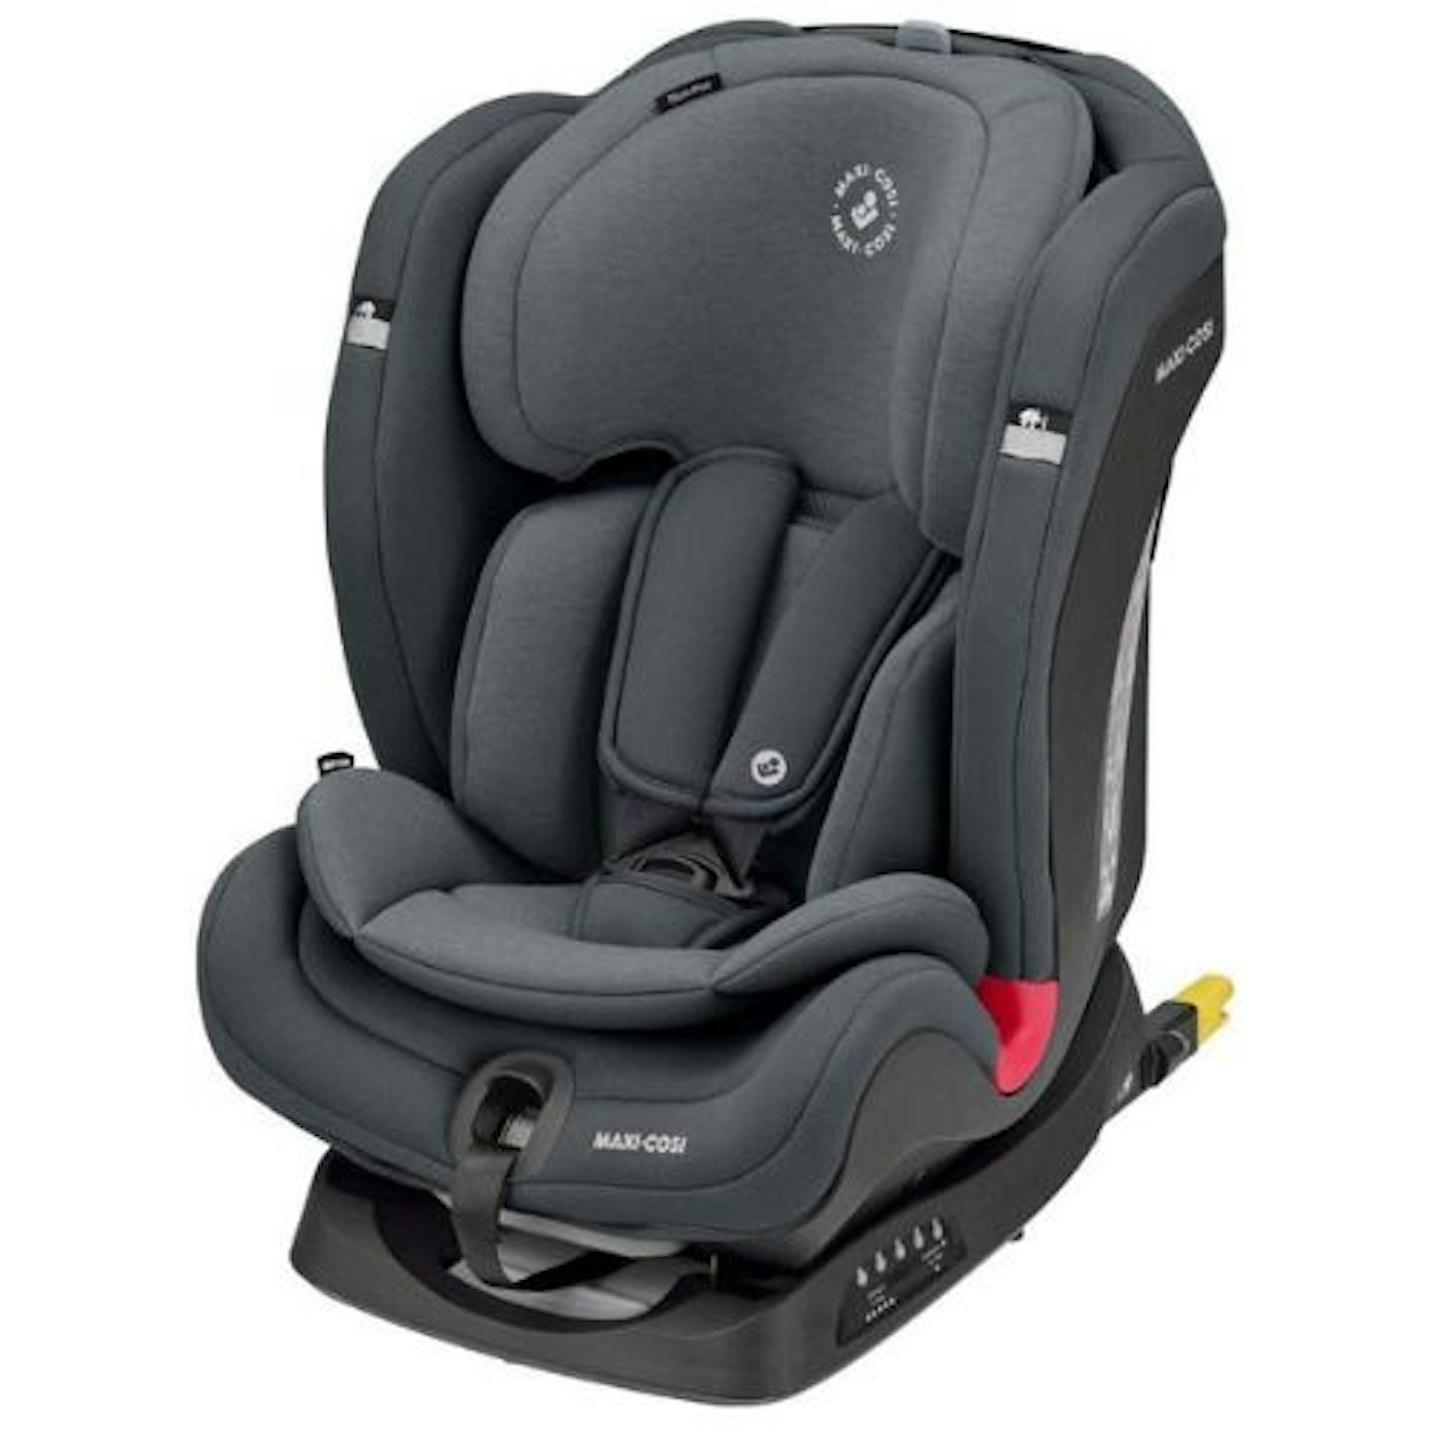 7 Best Car Seat Covers of 2023 - Reviewed